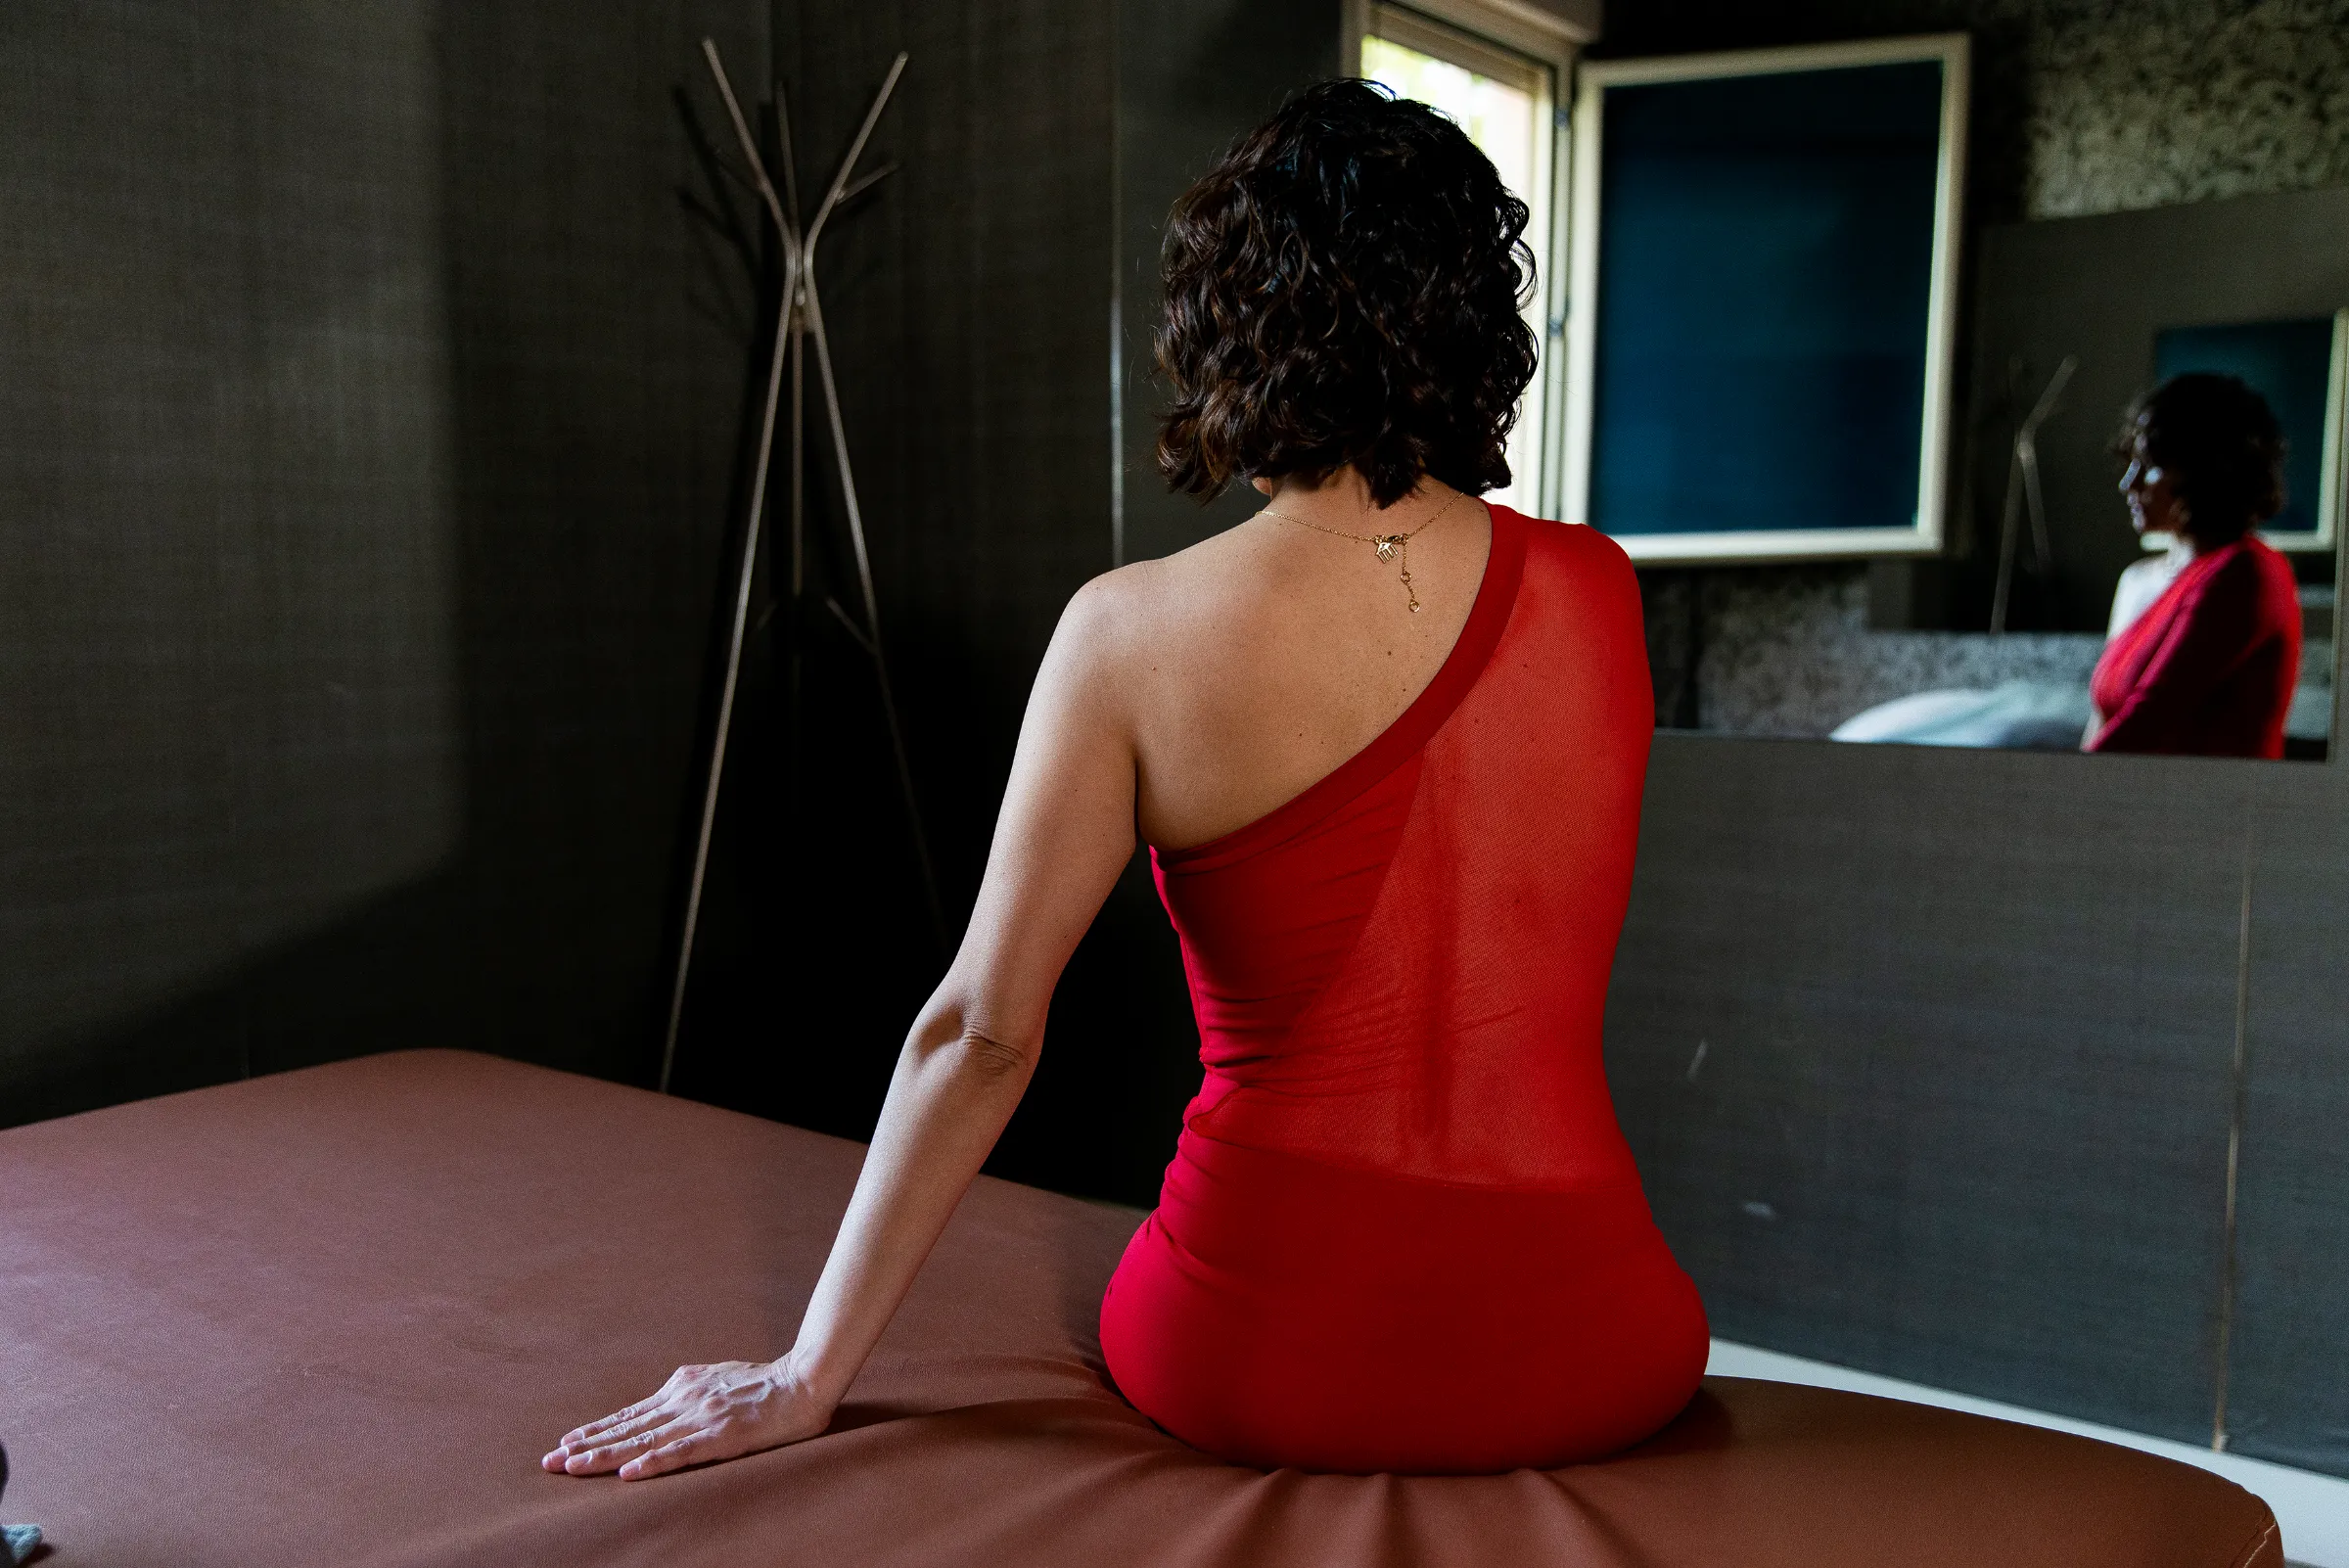 'Ángela' a sex worker waits to meet a client at a hotel in Madrid, Spain. October 2022